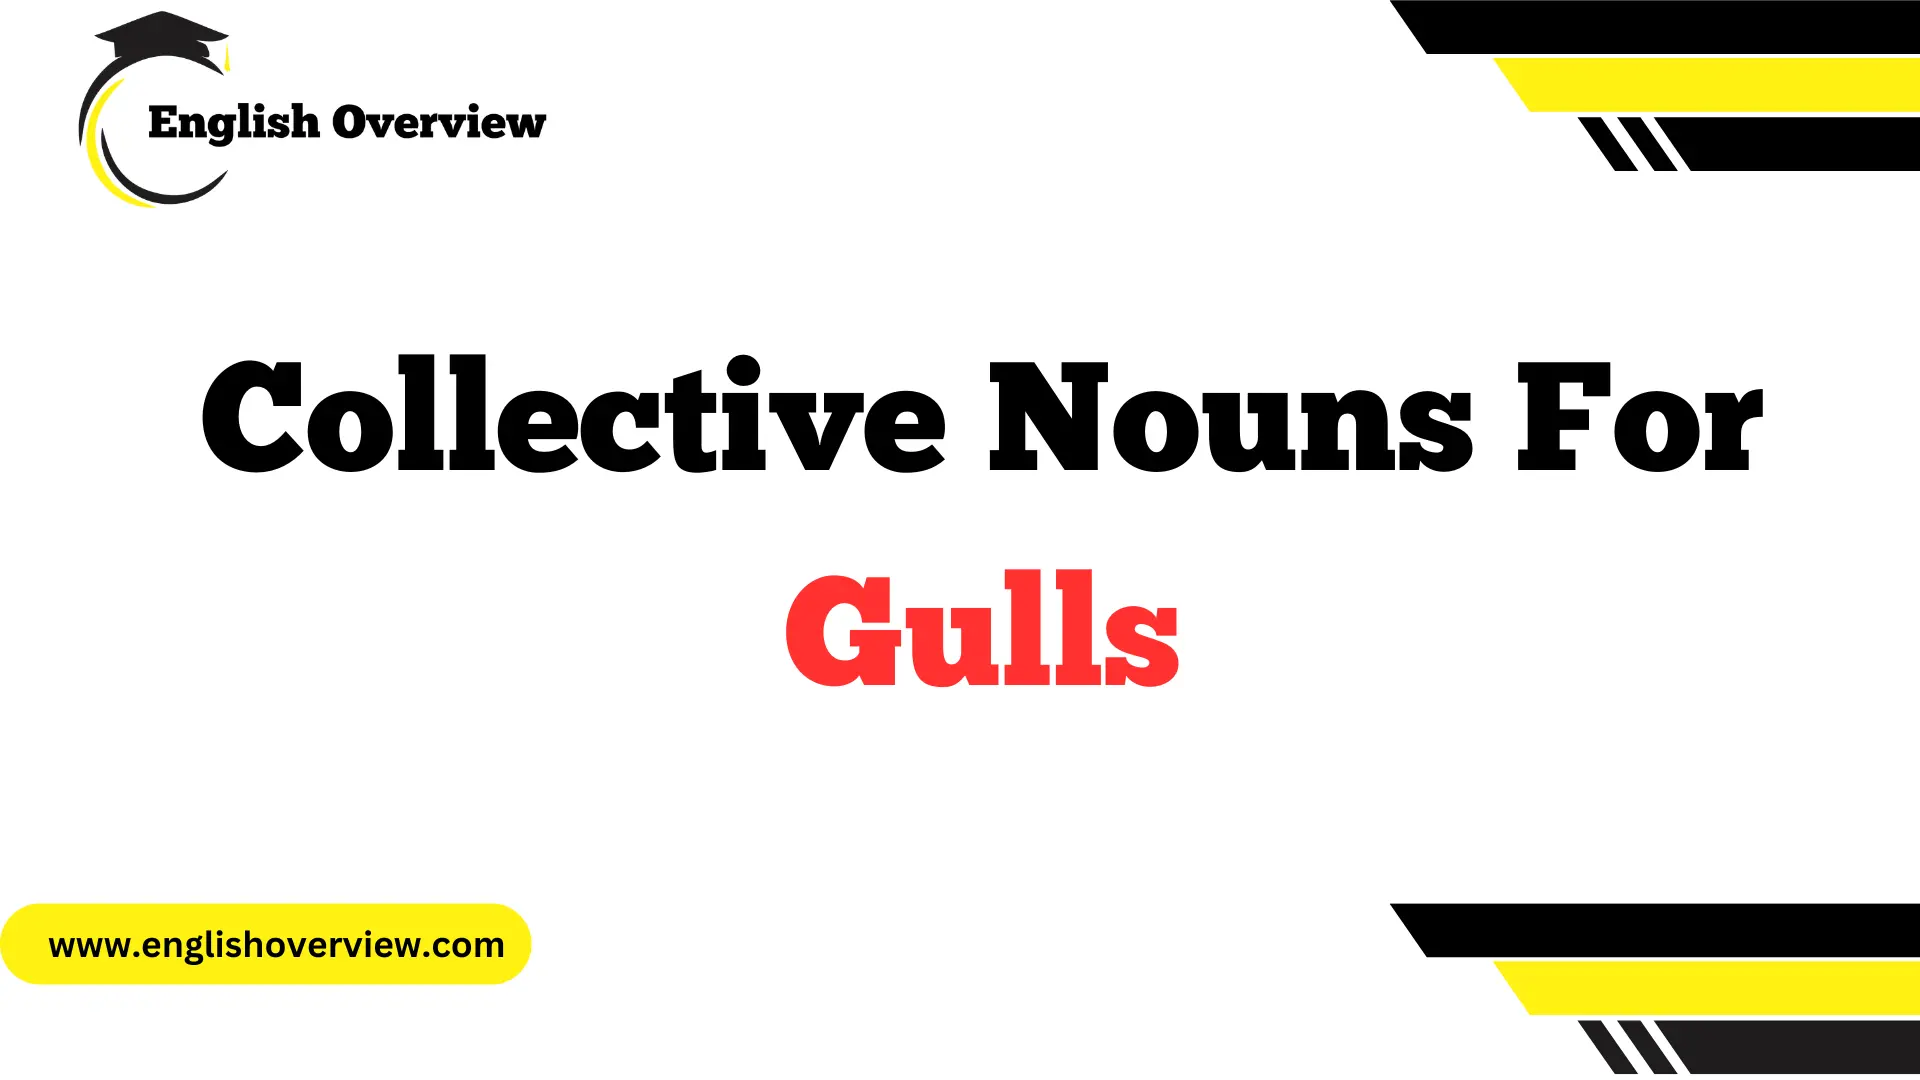 Collective Nouns For Gulls